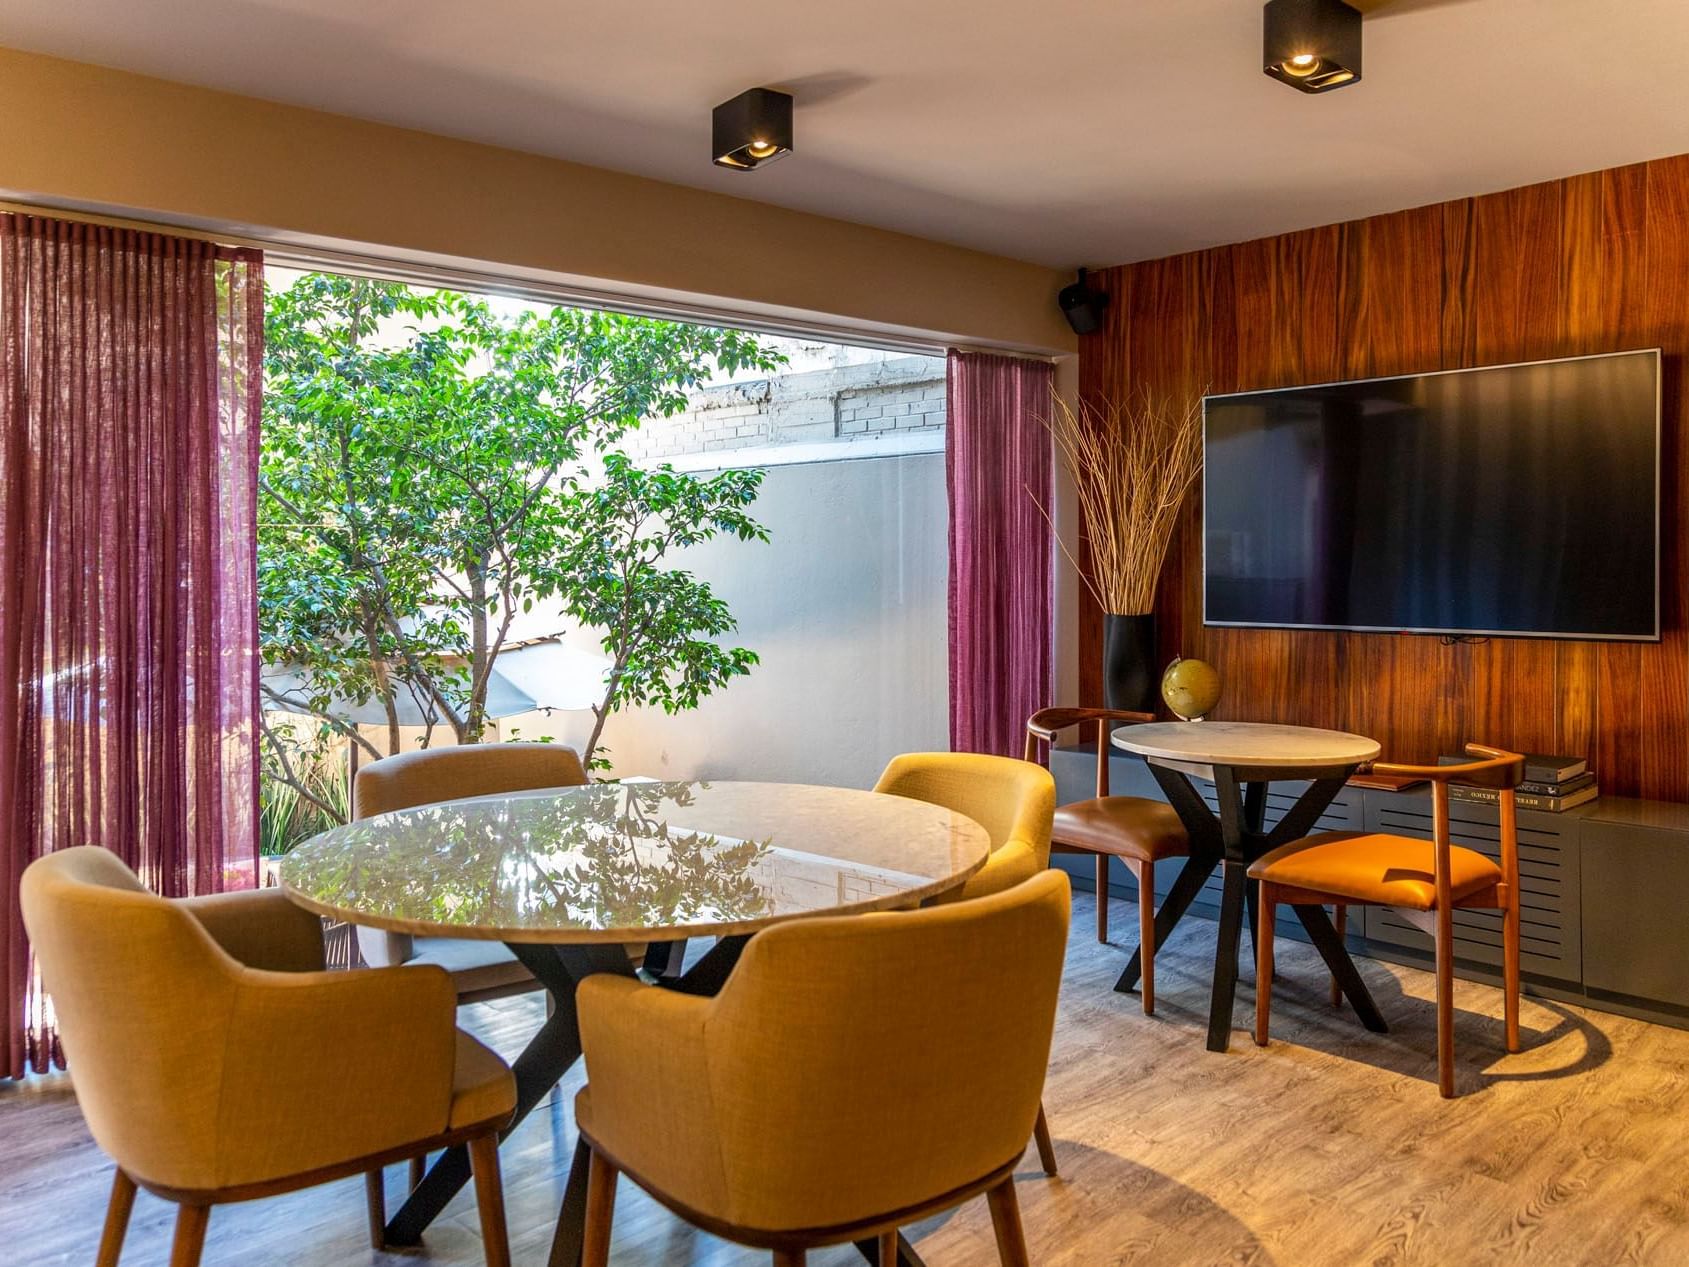 Dining table with TV area, room at Dominion Suites Polanco